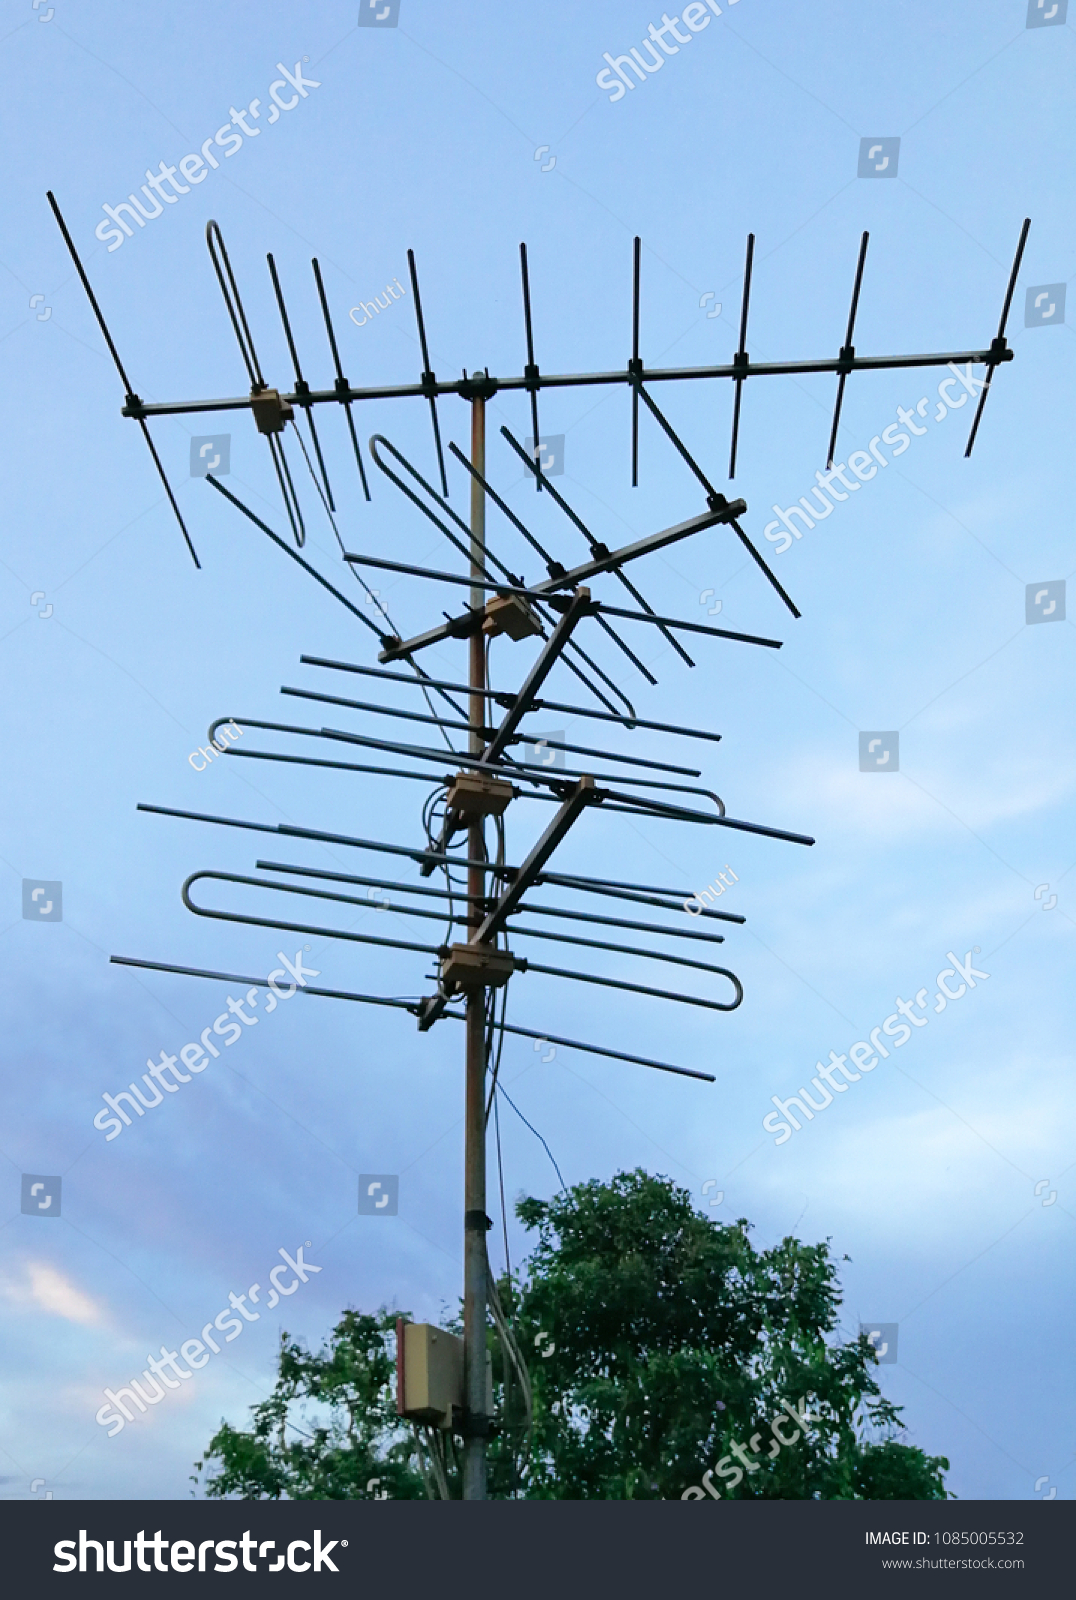 Tv Antenna On Roof House Objects Stock Image